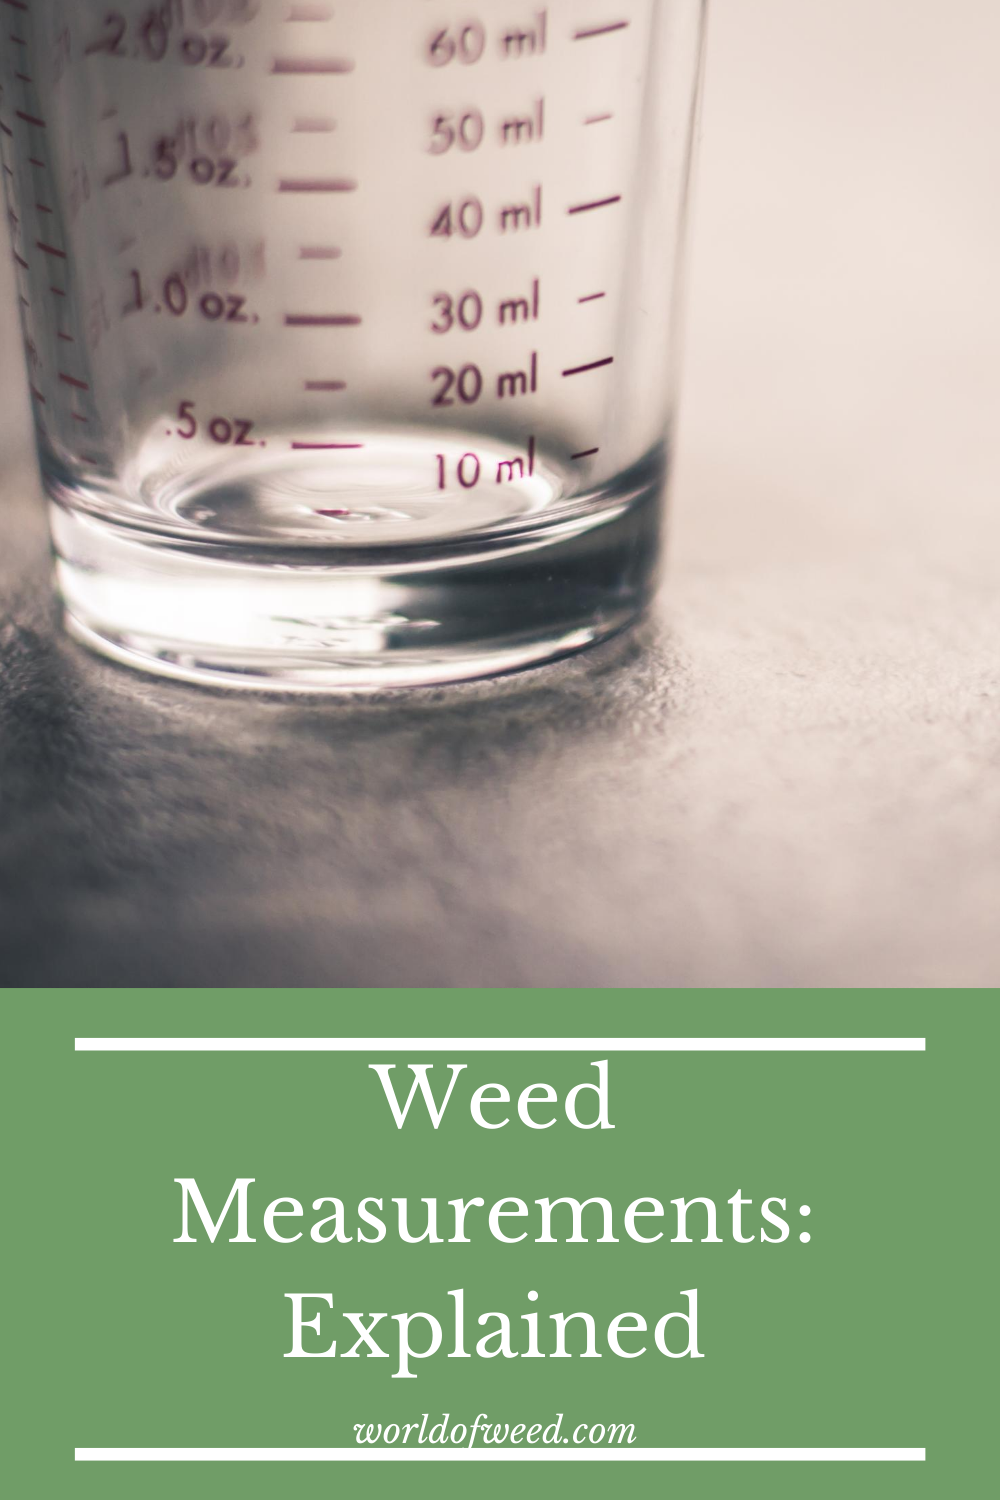 http://www.worldofweed.com/wp-content/uploads/2020/08/weed-measurements-explained.png